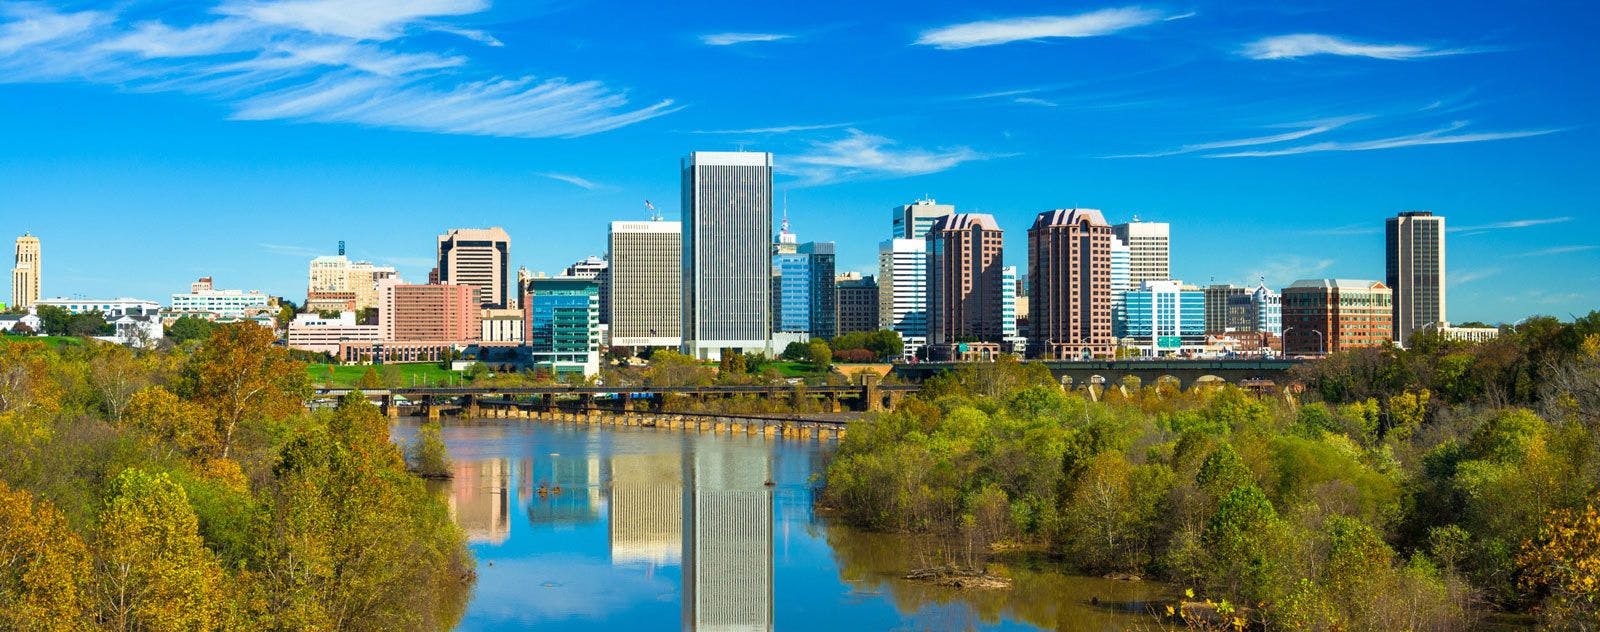 The skyline of Richmond city in Virginia reflected in a lake